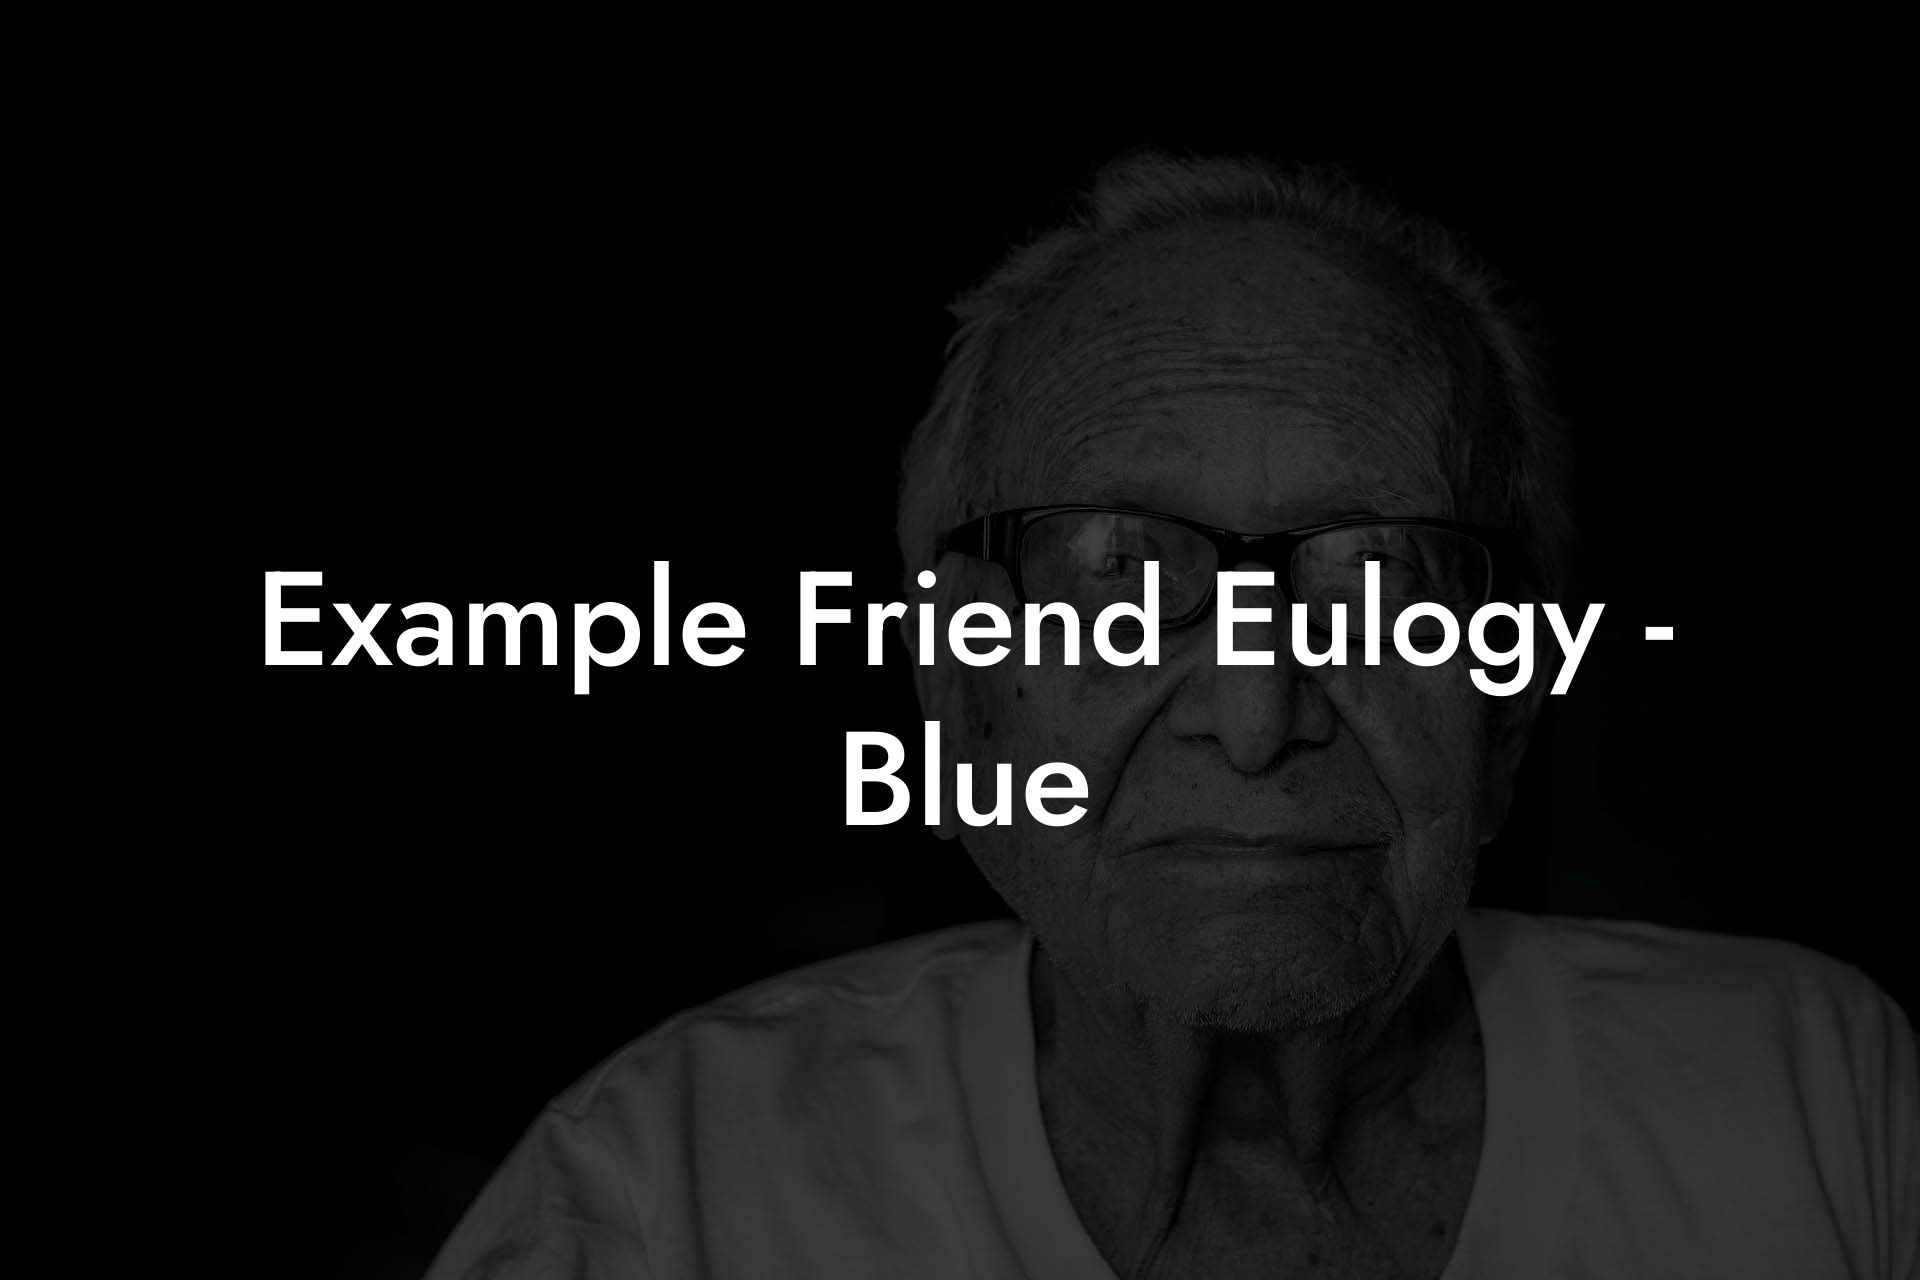 Example Friend Eulogy - Blue